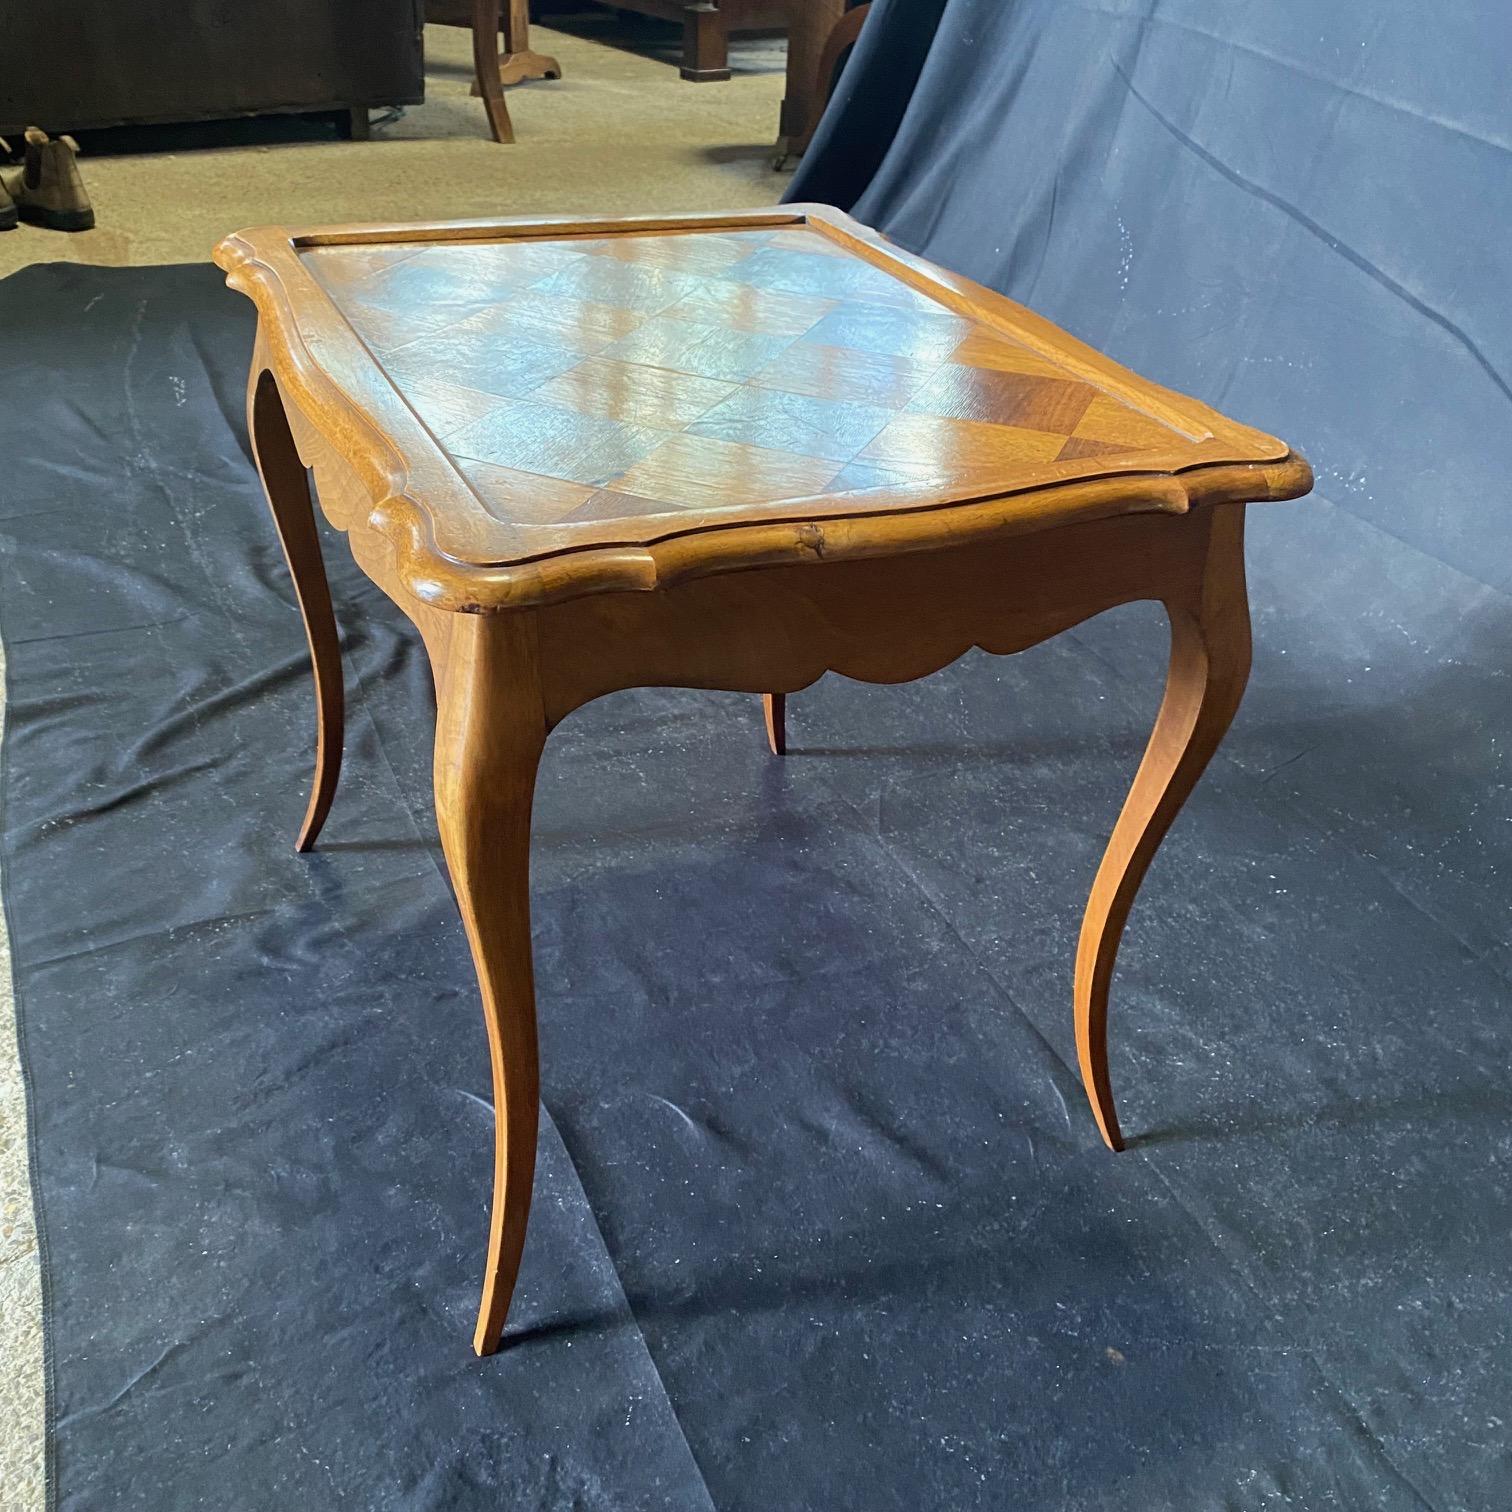 Antique French Louis XV side table having carved walnut  beautiful rimmed parquet top.  Full parquet design on the tabletop has beautiful grain and a wide band with beveled edging. The apron has delicate carvings along the lower serpentine edge, and